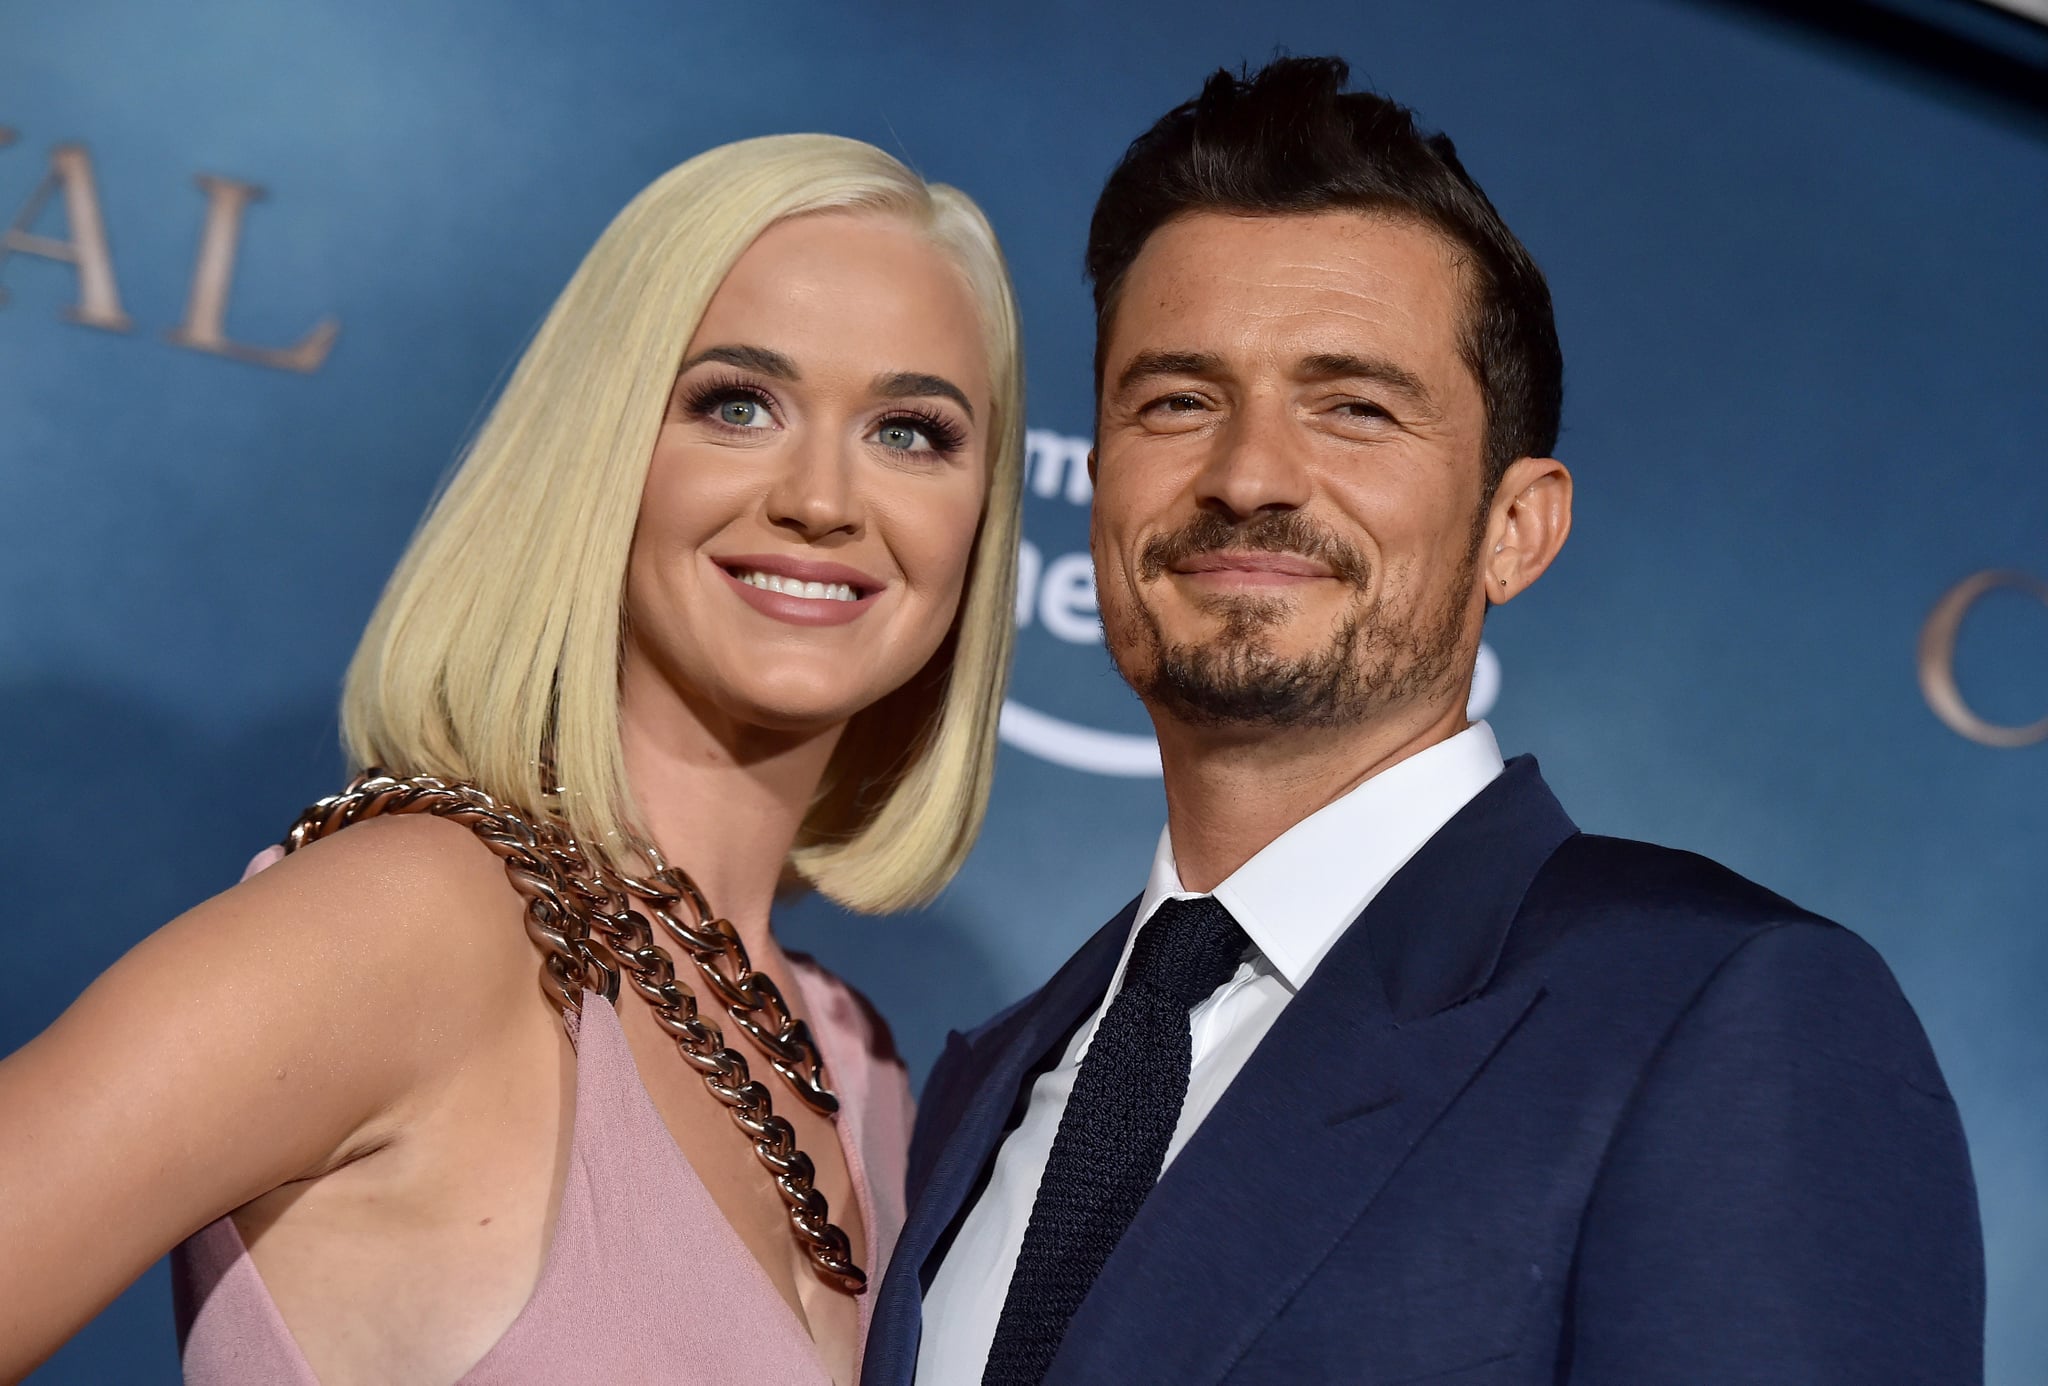 HOLLYWOOD, CALIFORNIA - AUGUST 21: Katy Perry and Orlando Bloom attend the LA Premiere of Amazon's 